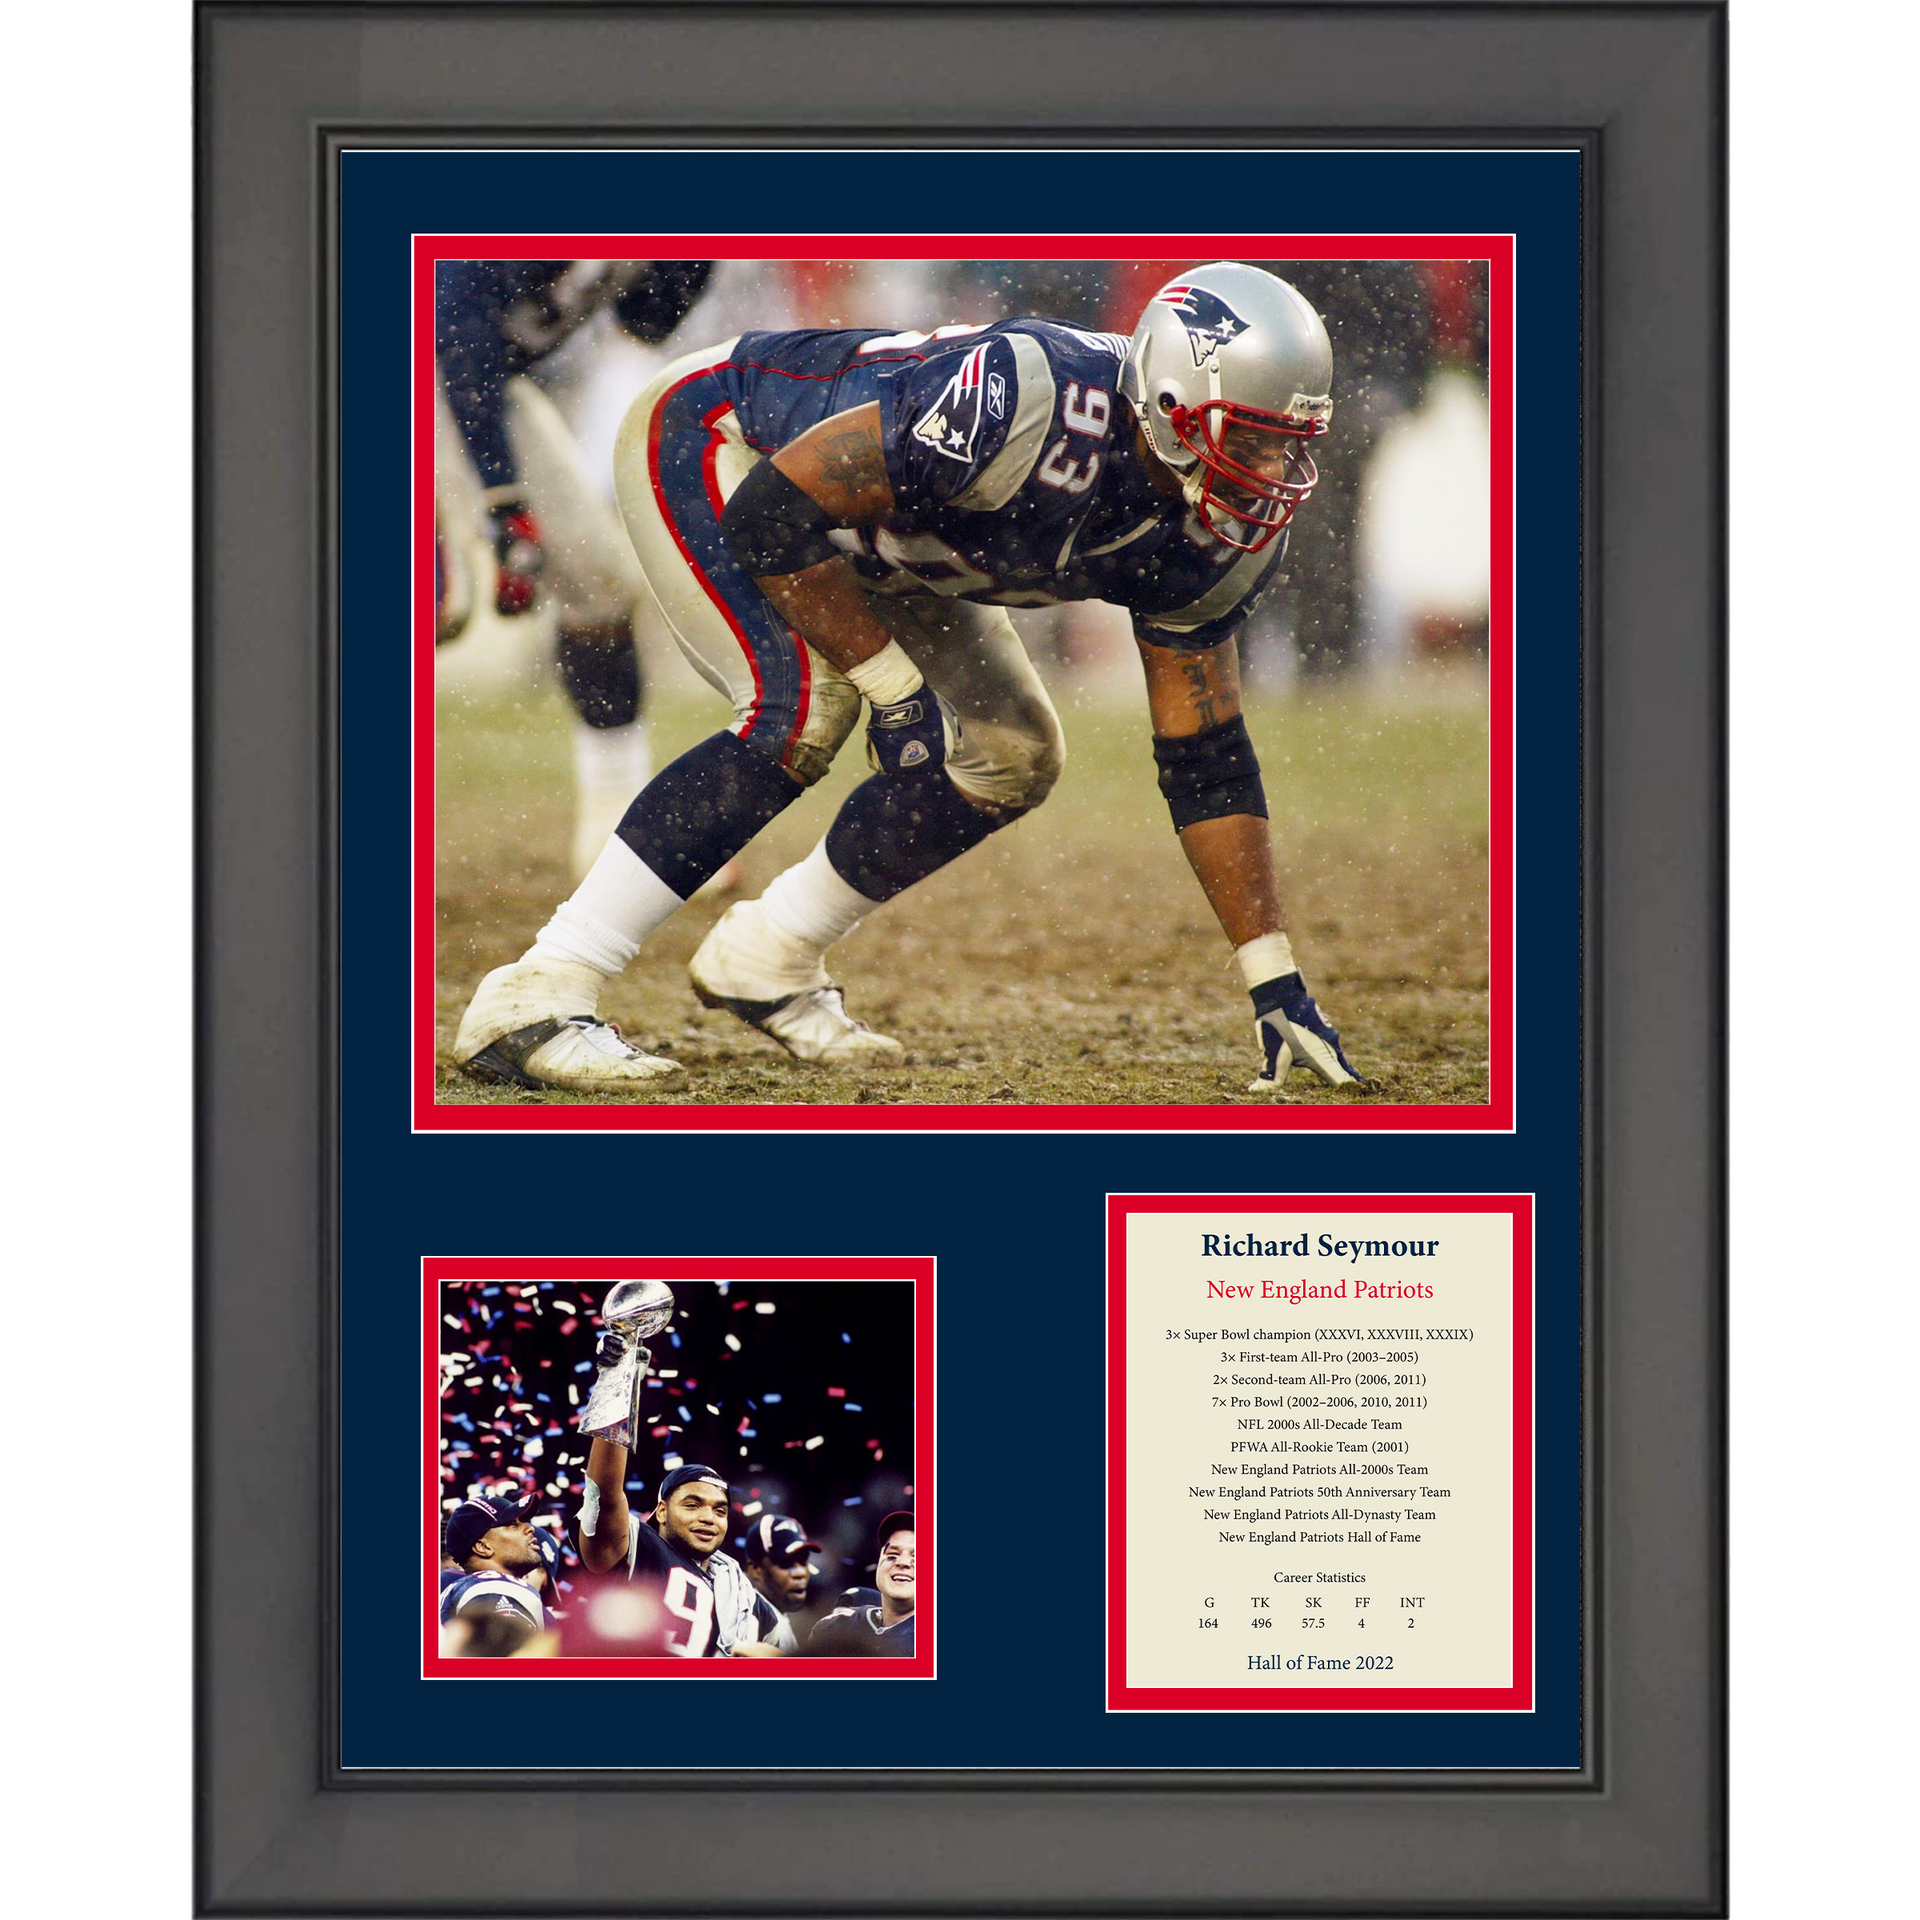 Andre Tippett New England Patriots HOF Signed/Autographed 8x10